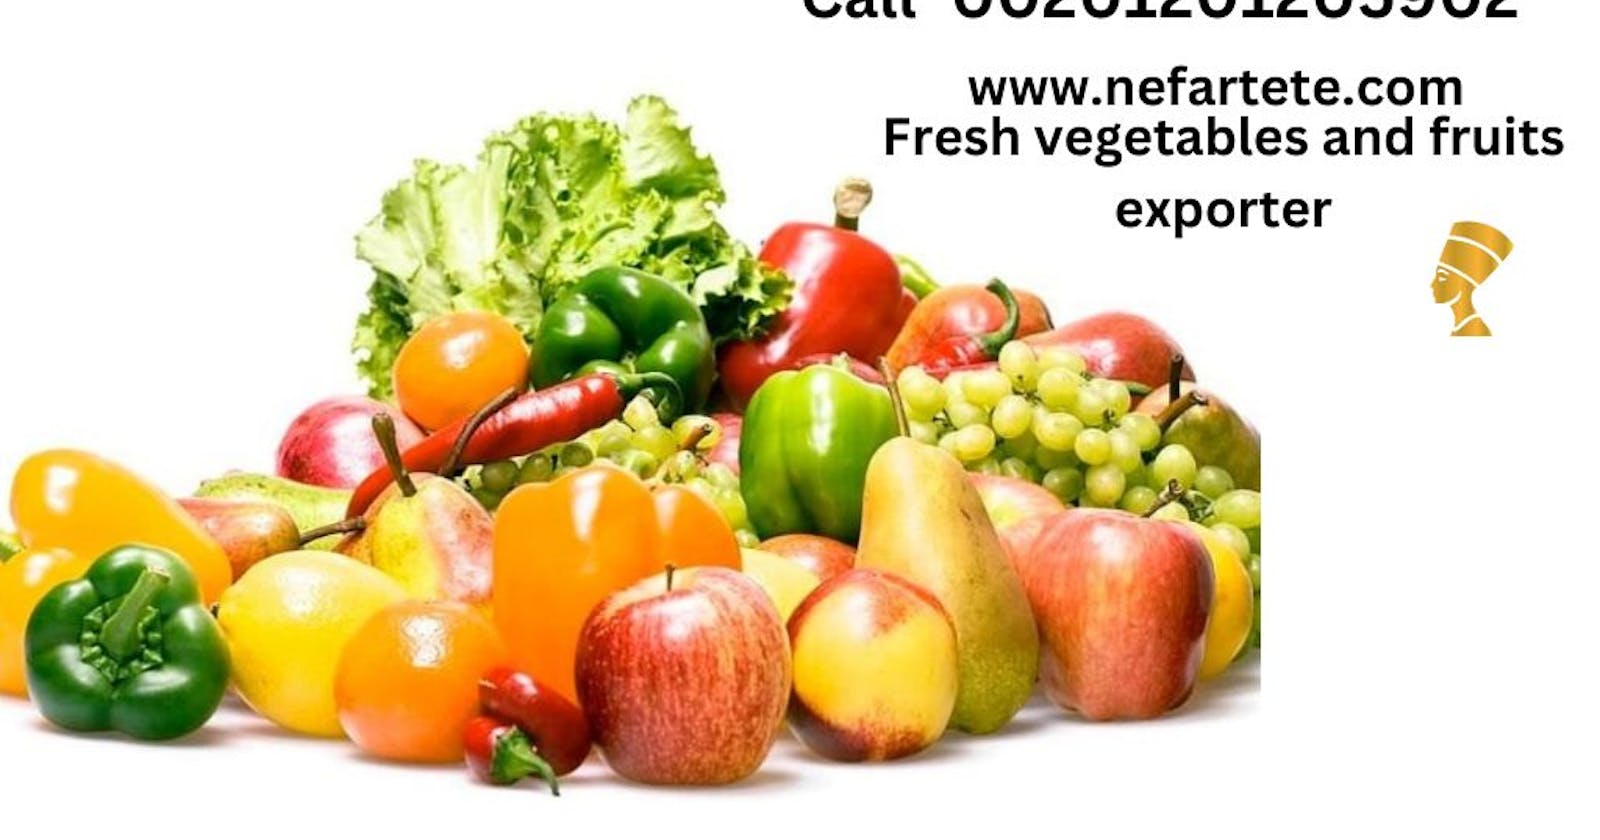 Nefartete exporter: Exporting Egyptian Vegetables and Fruits

Egypt has long been renowned for its rich agricultural exports, particularly in the fiel